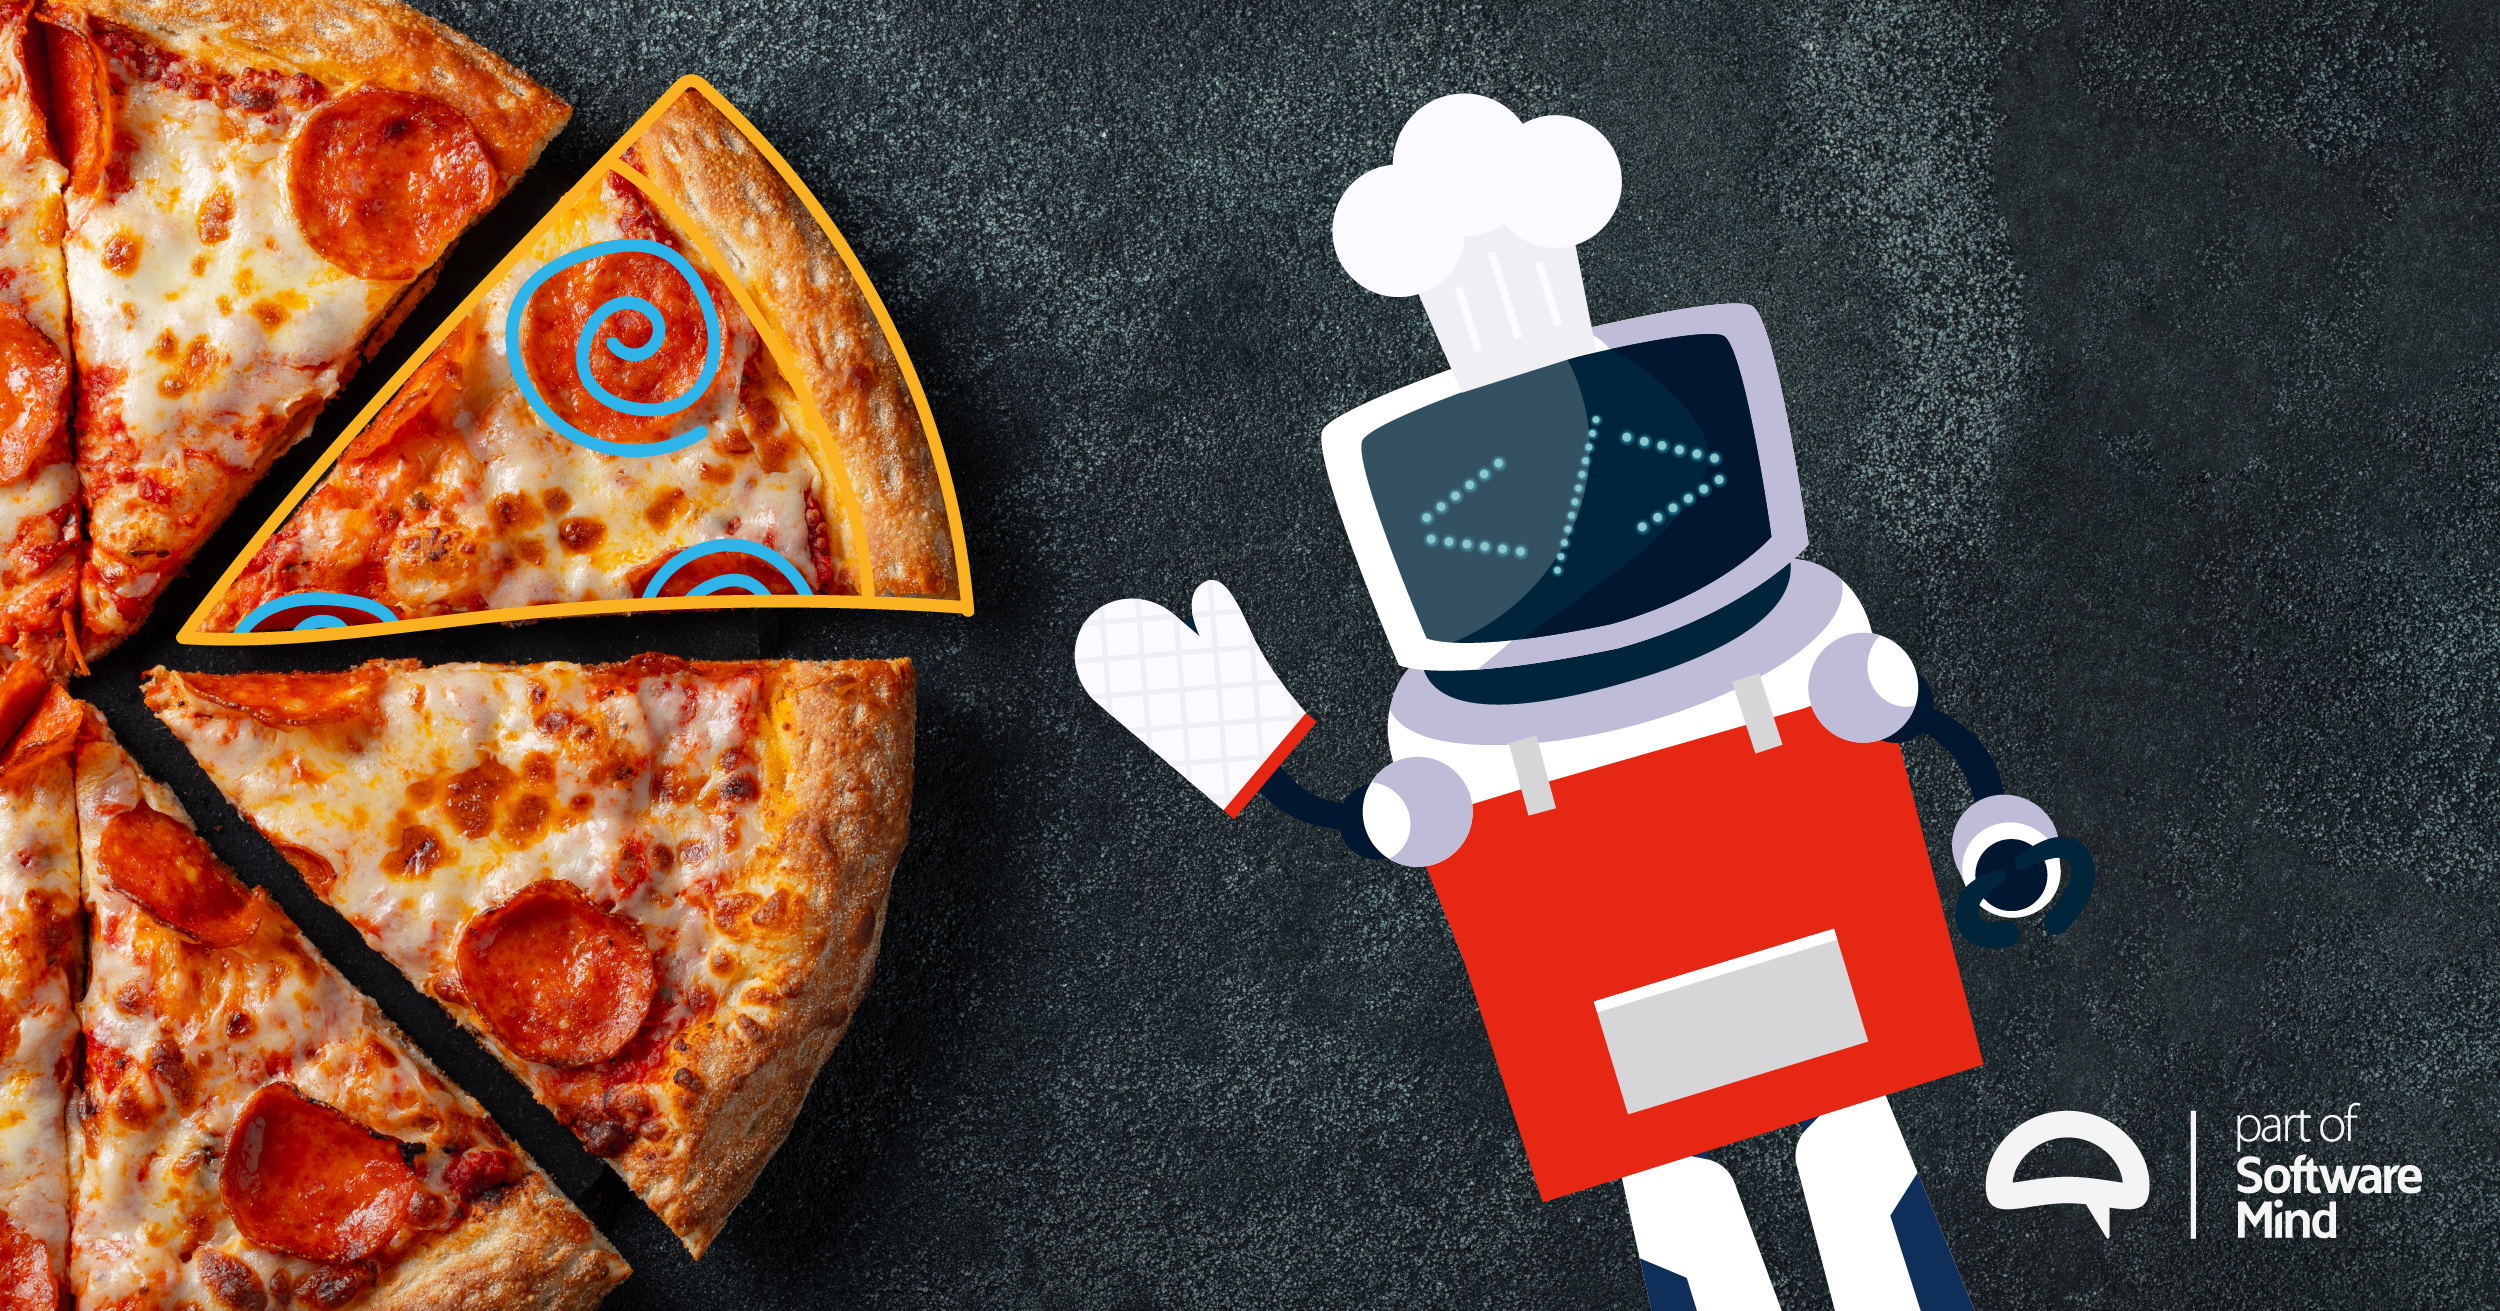 Project Management: The Pizza Analogy